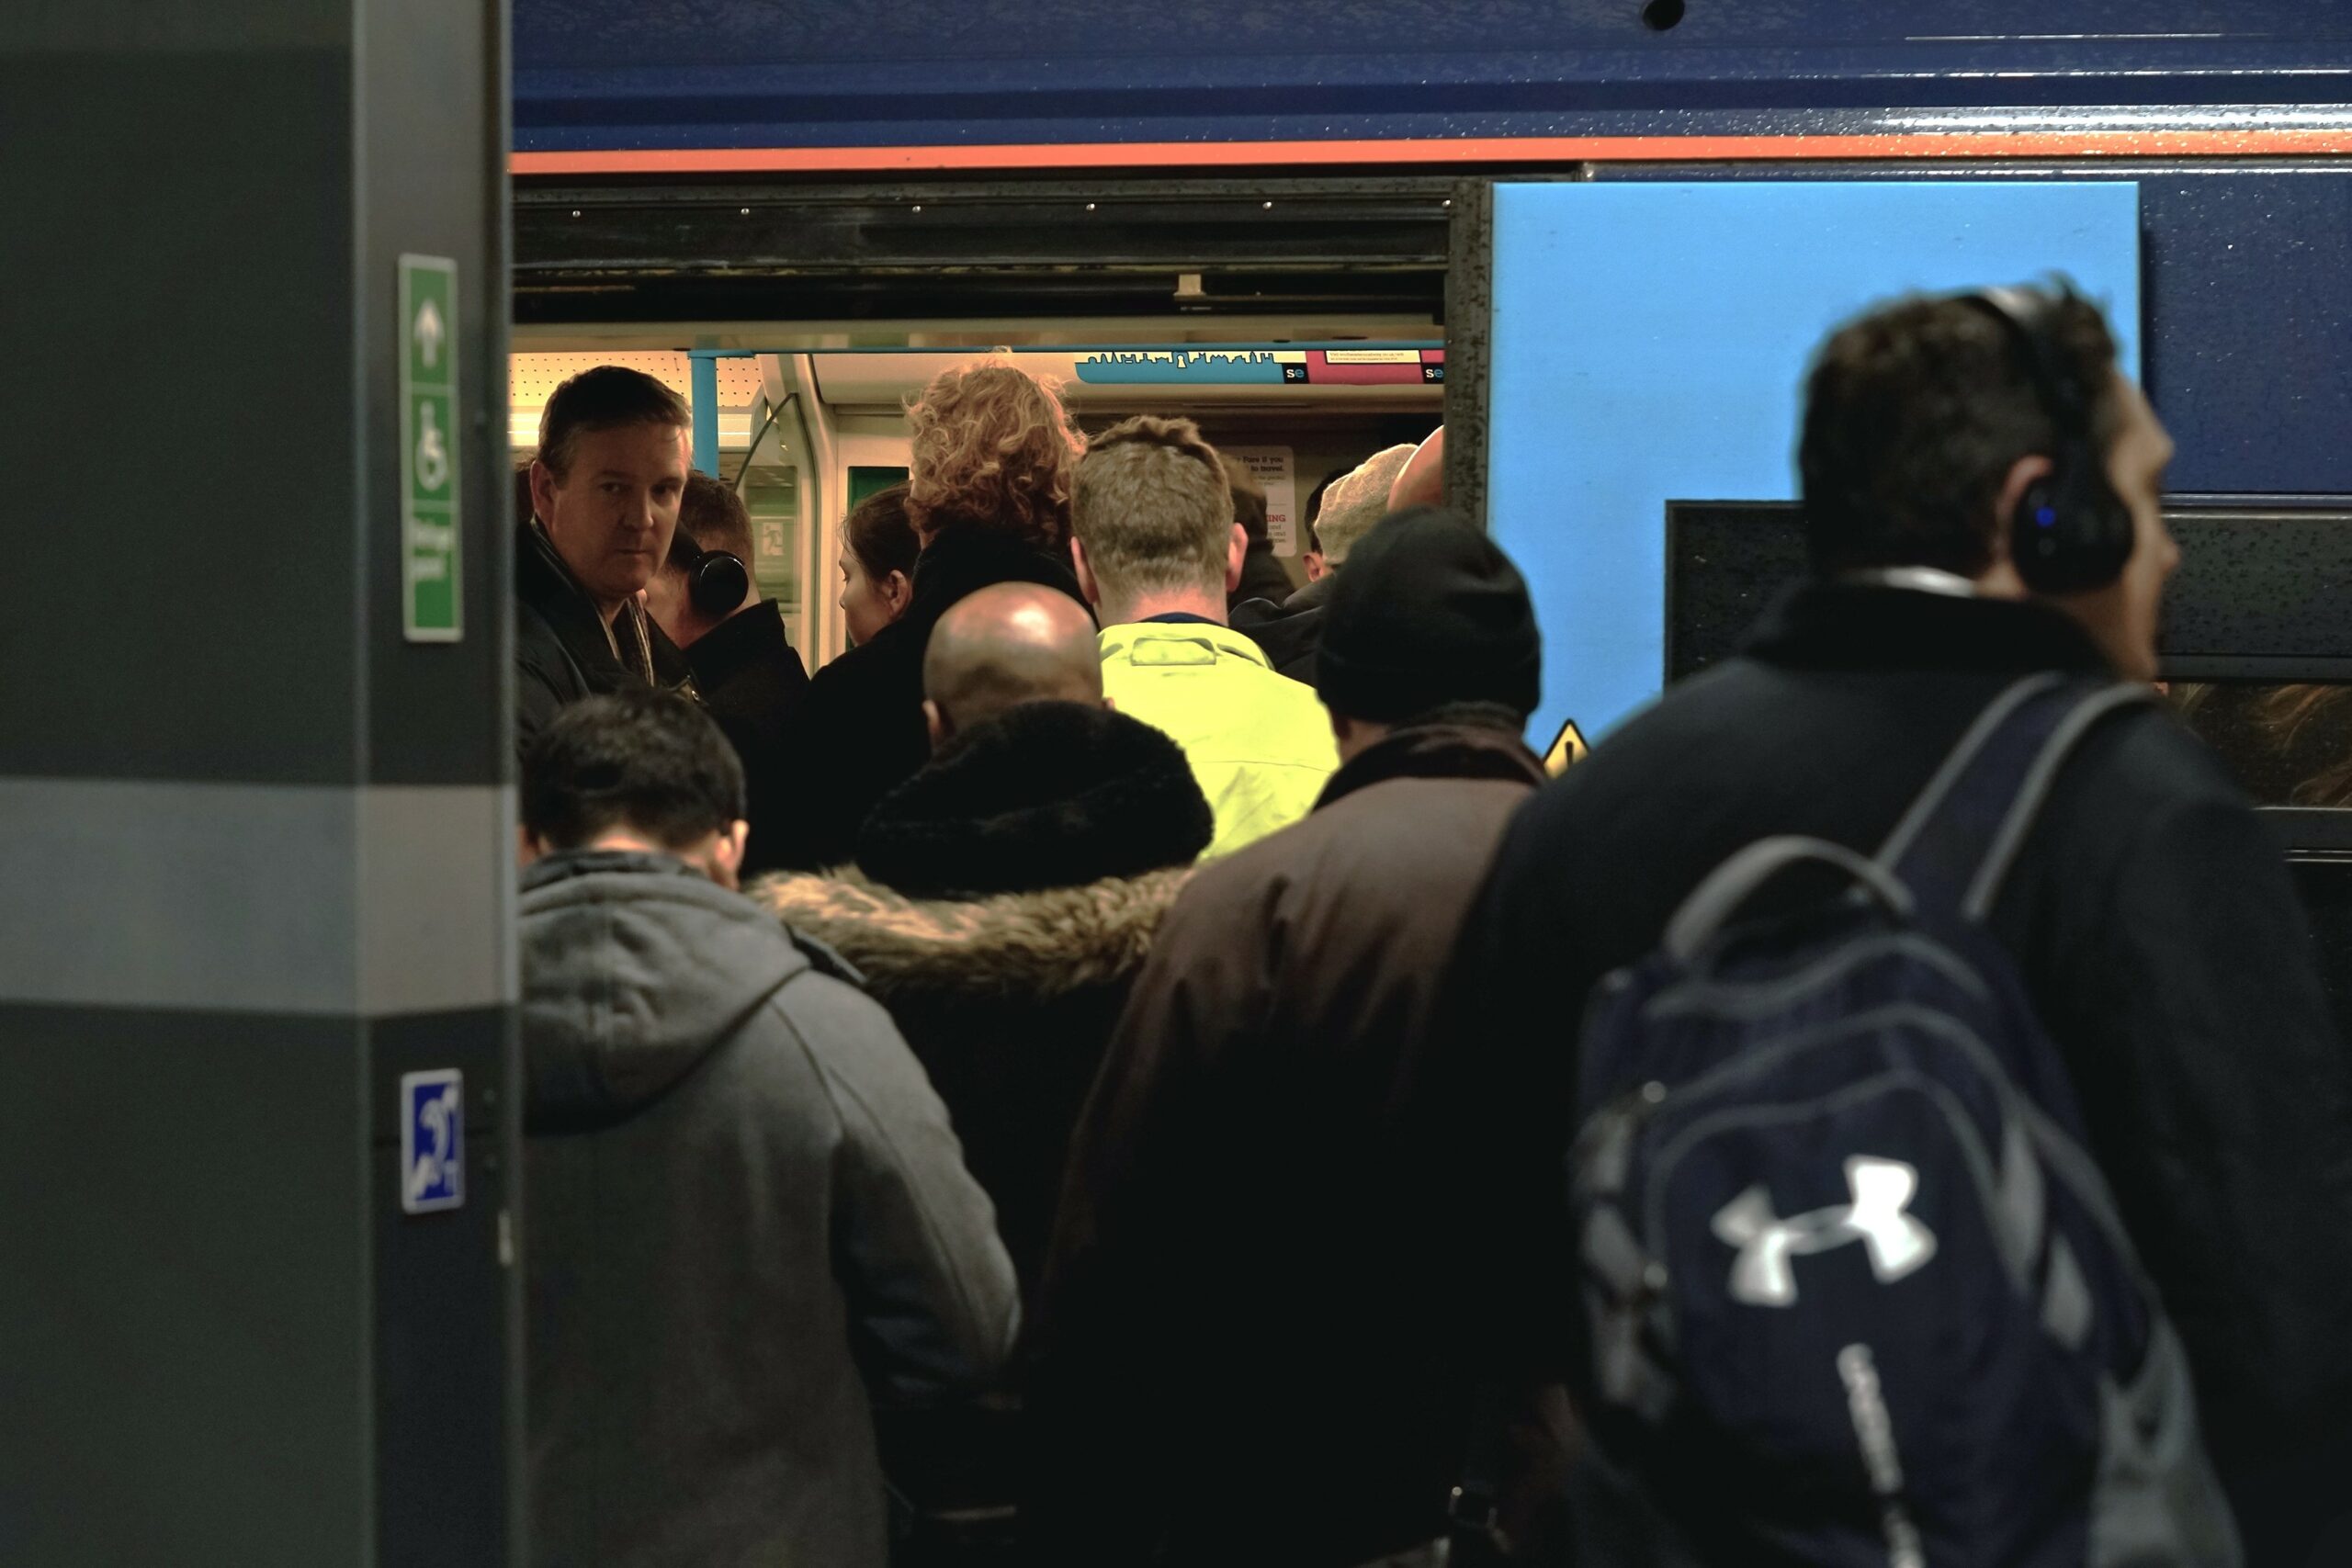 Crowded Southeastern train at London Bridge following December timetable changes